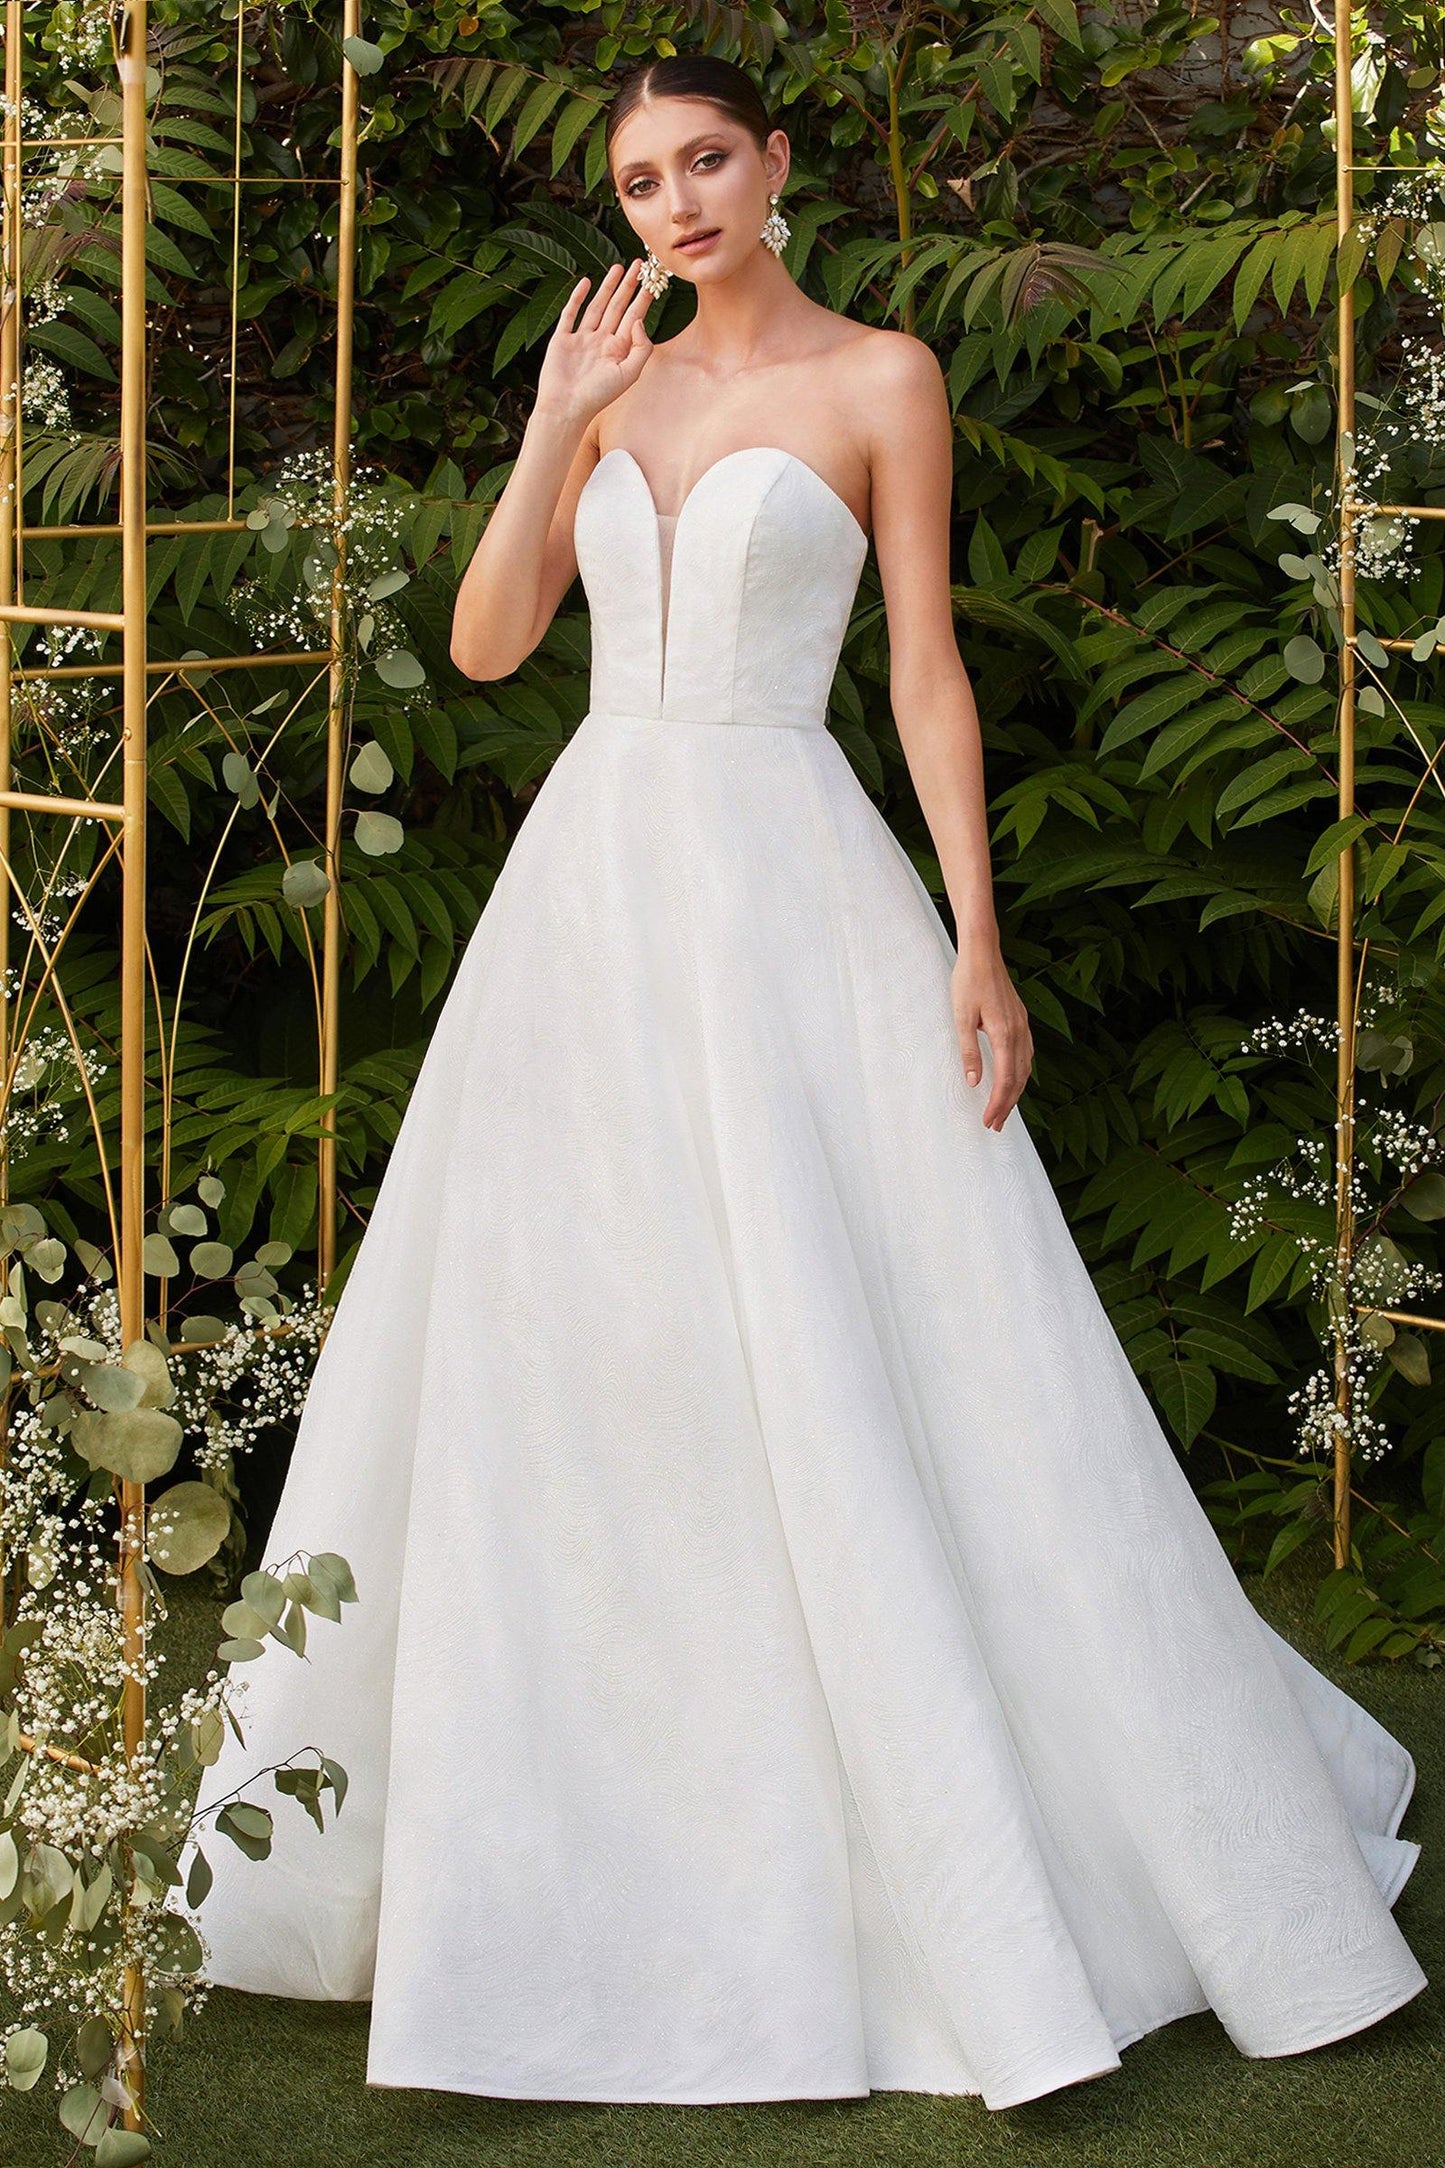 Long Bridal Gown Wedding Dress - The Dress Outlet